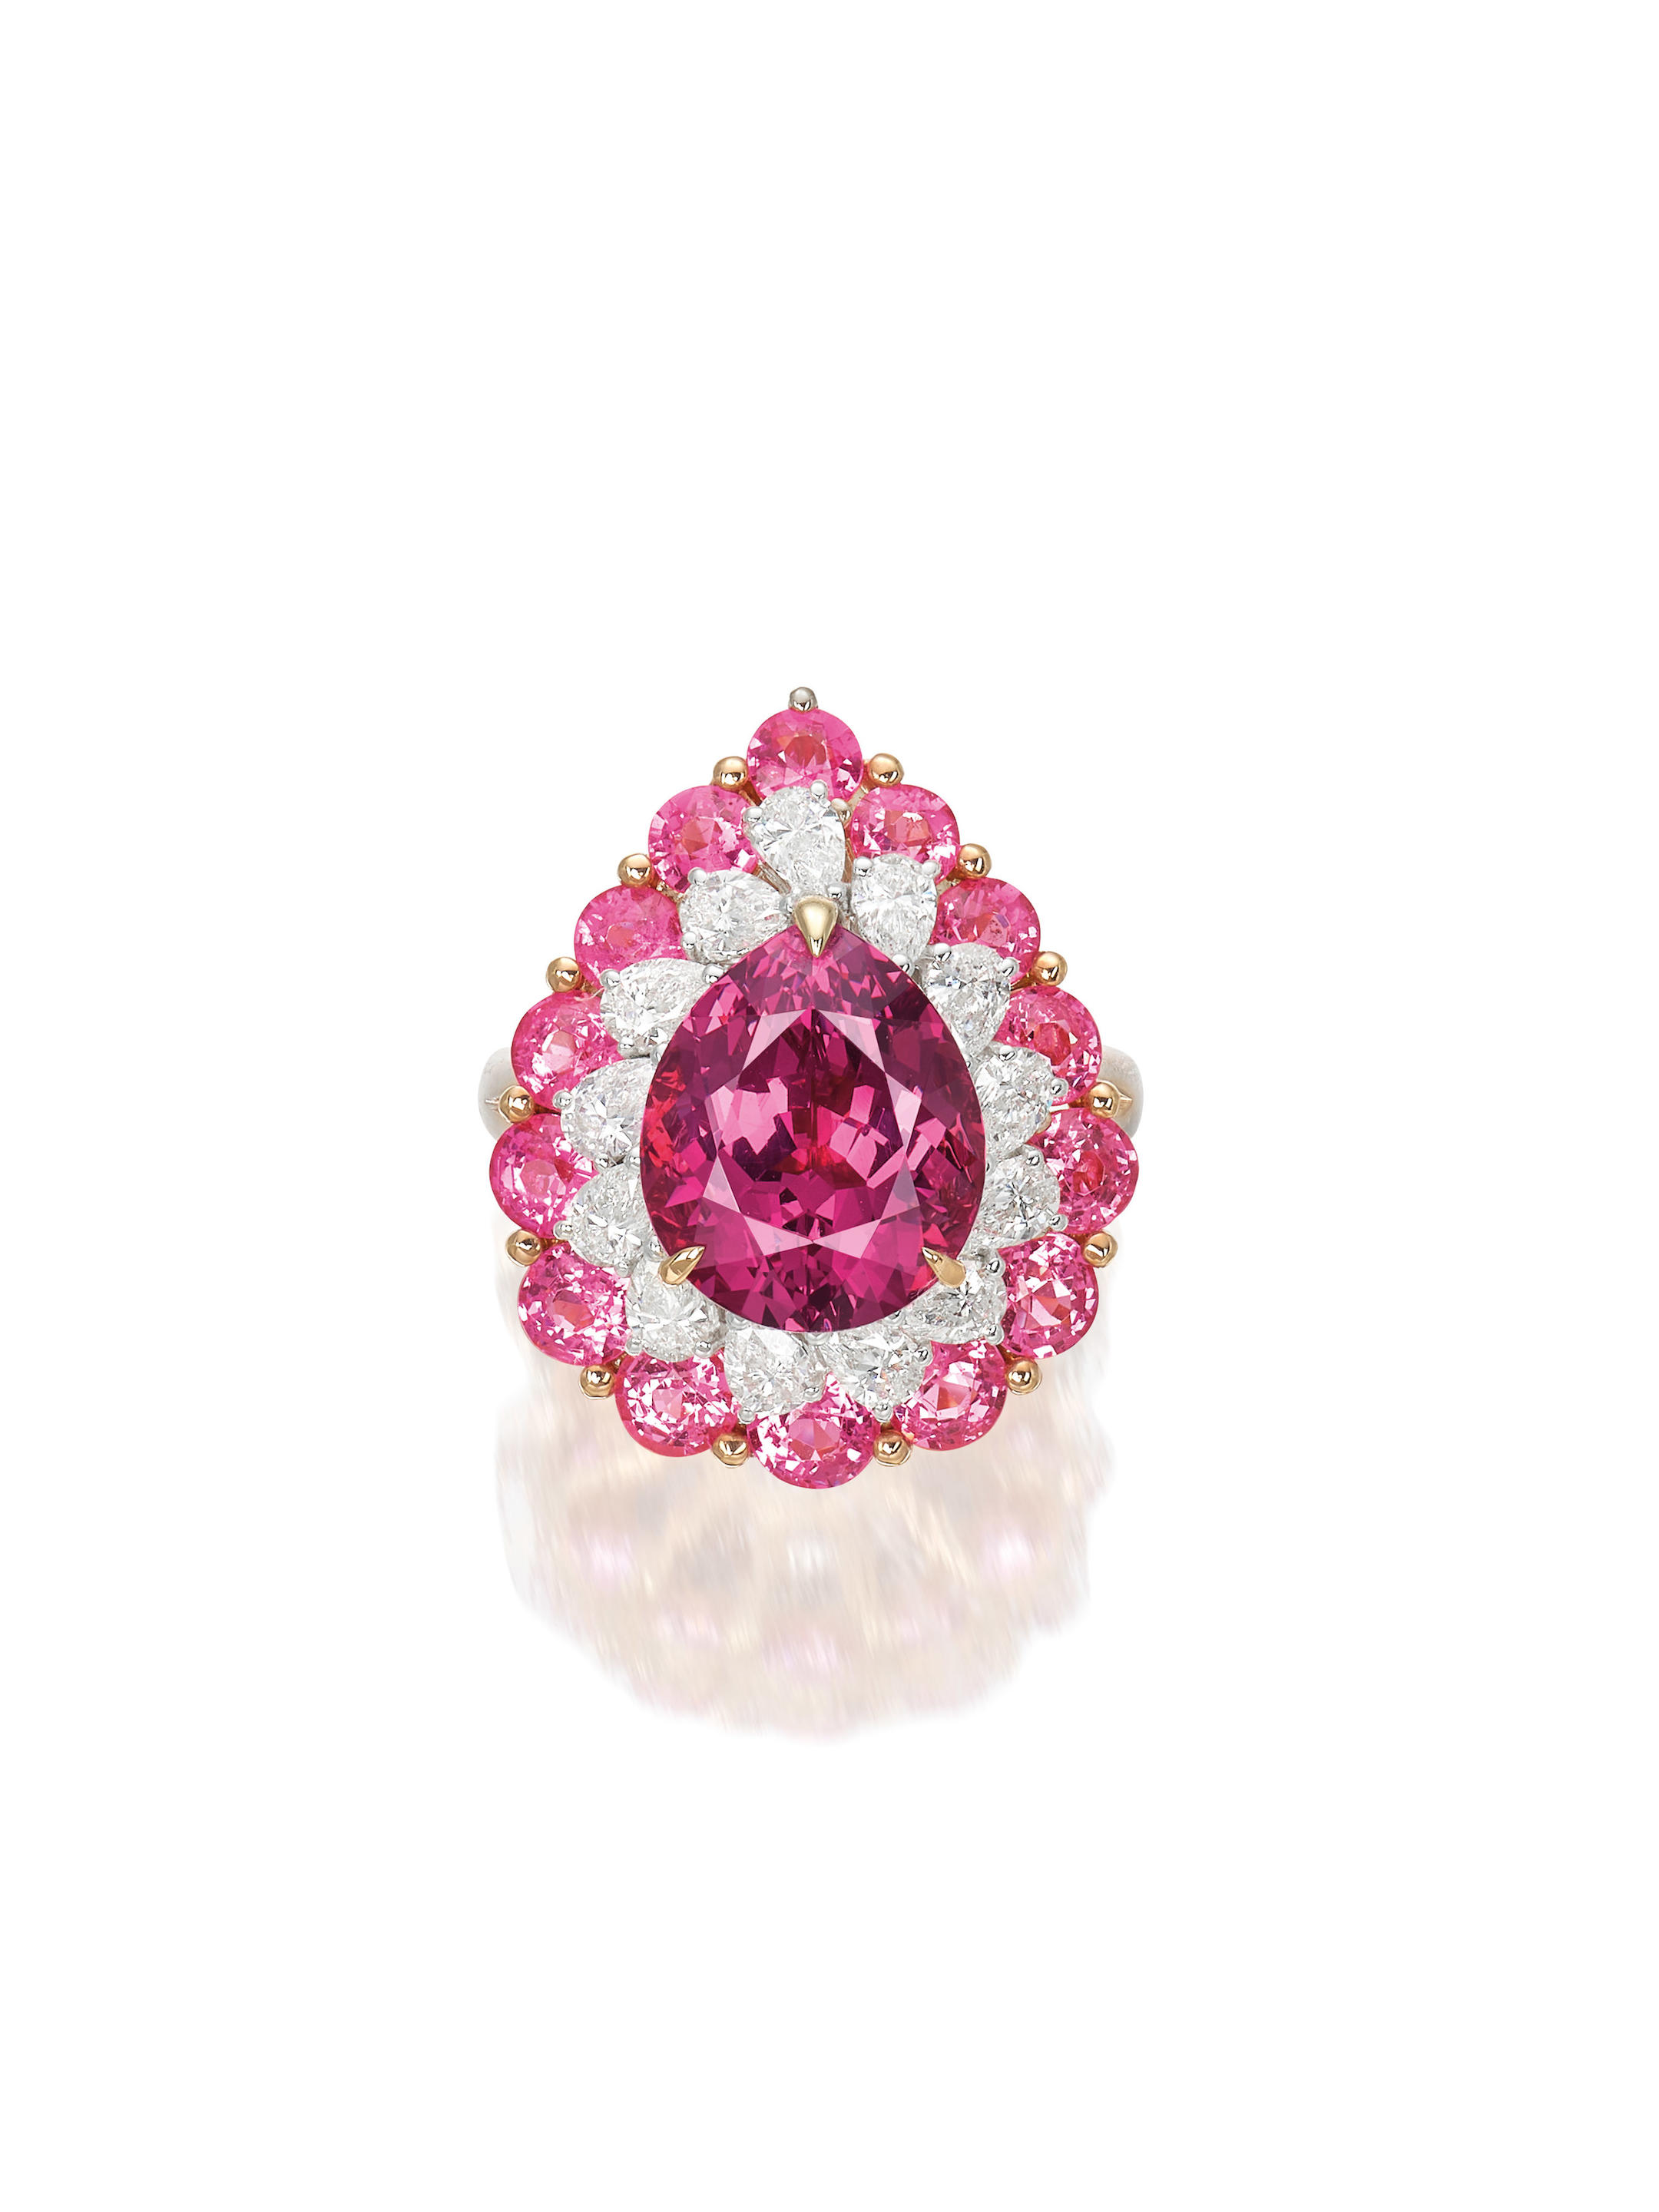 A PINK SPINEL AND DIAMOND RING